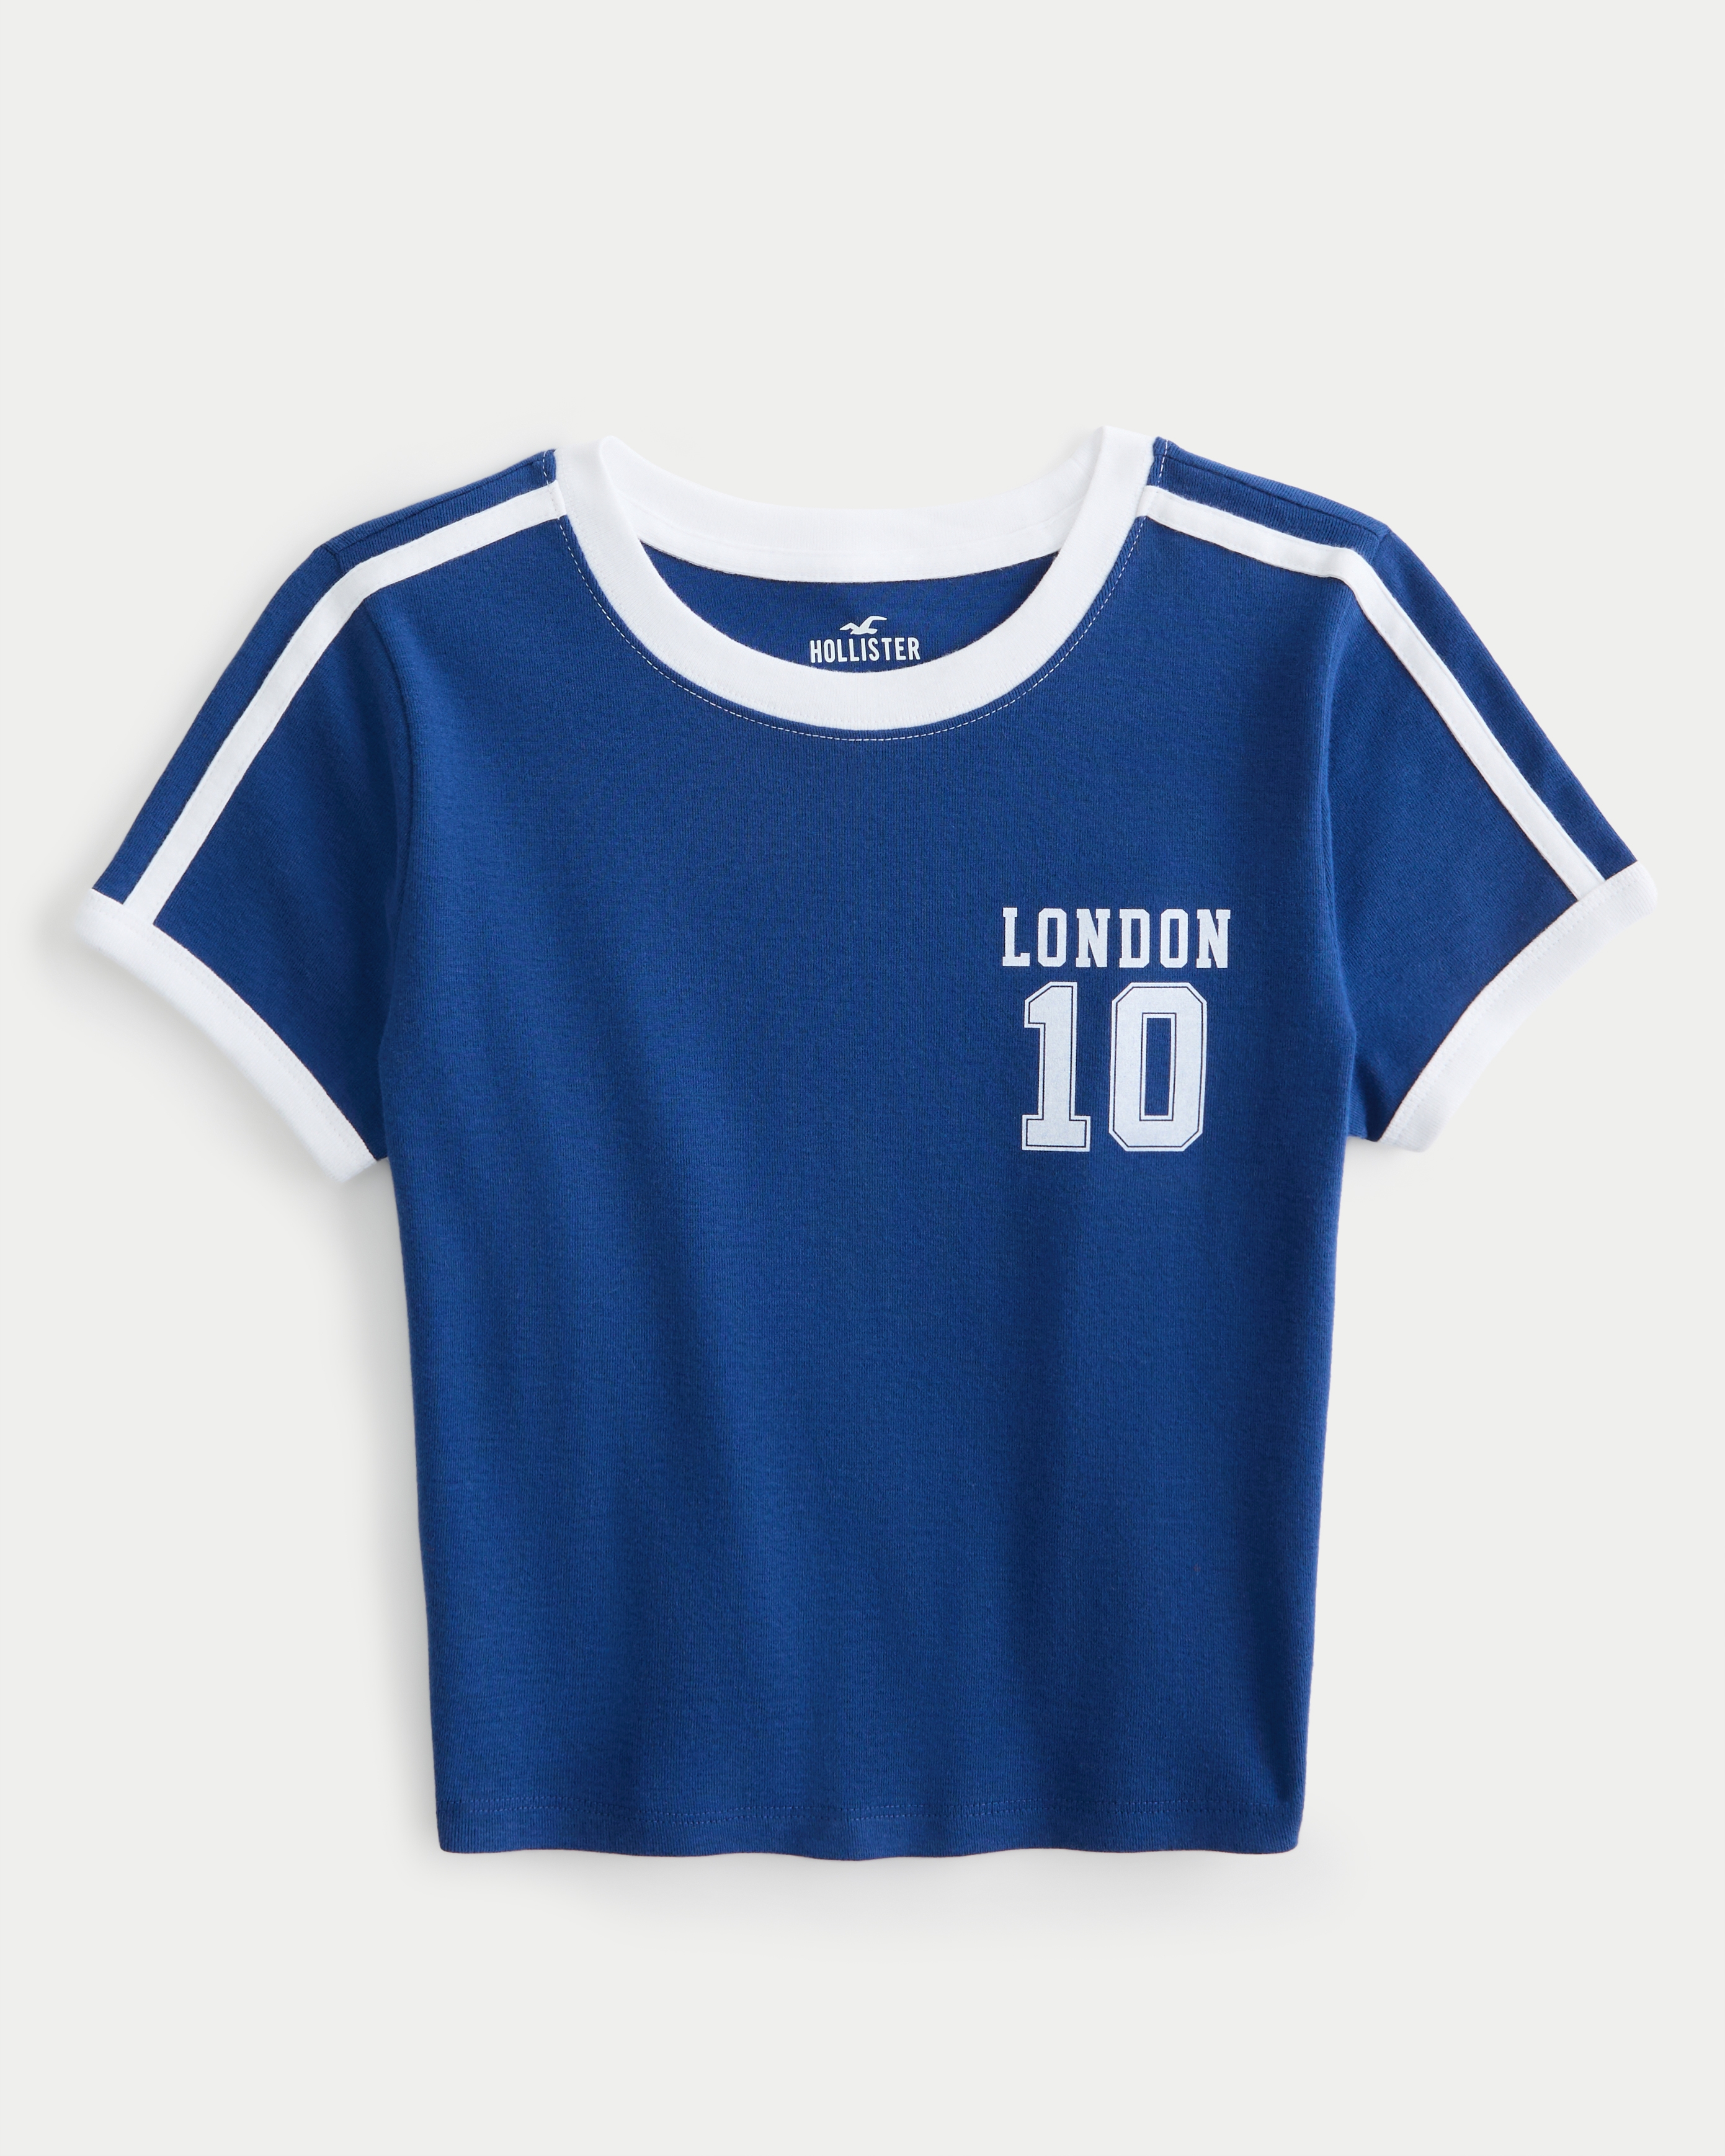 Georgetown Graphic Baby Tee